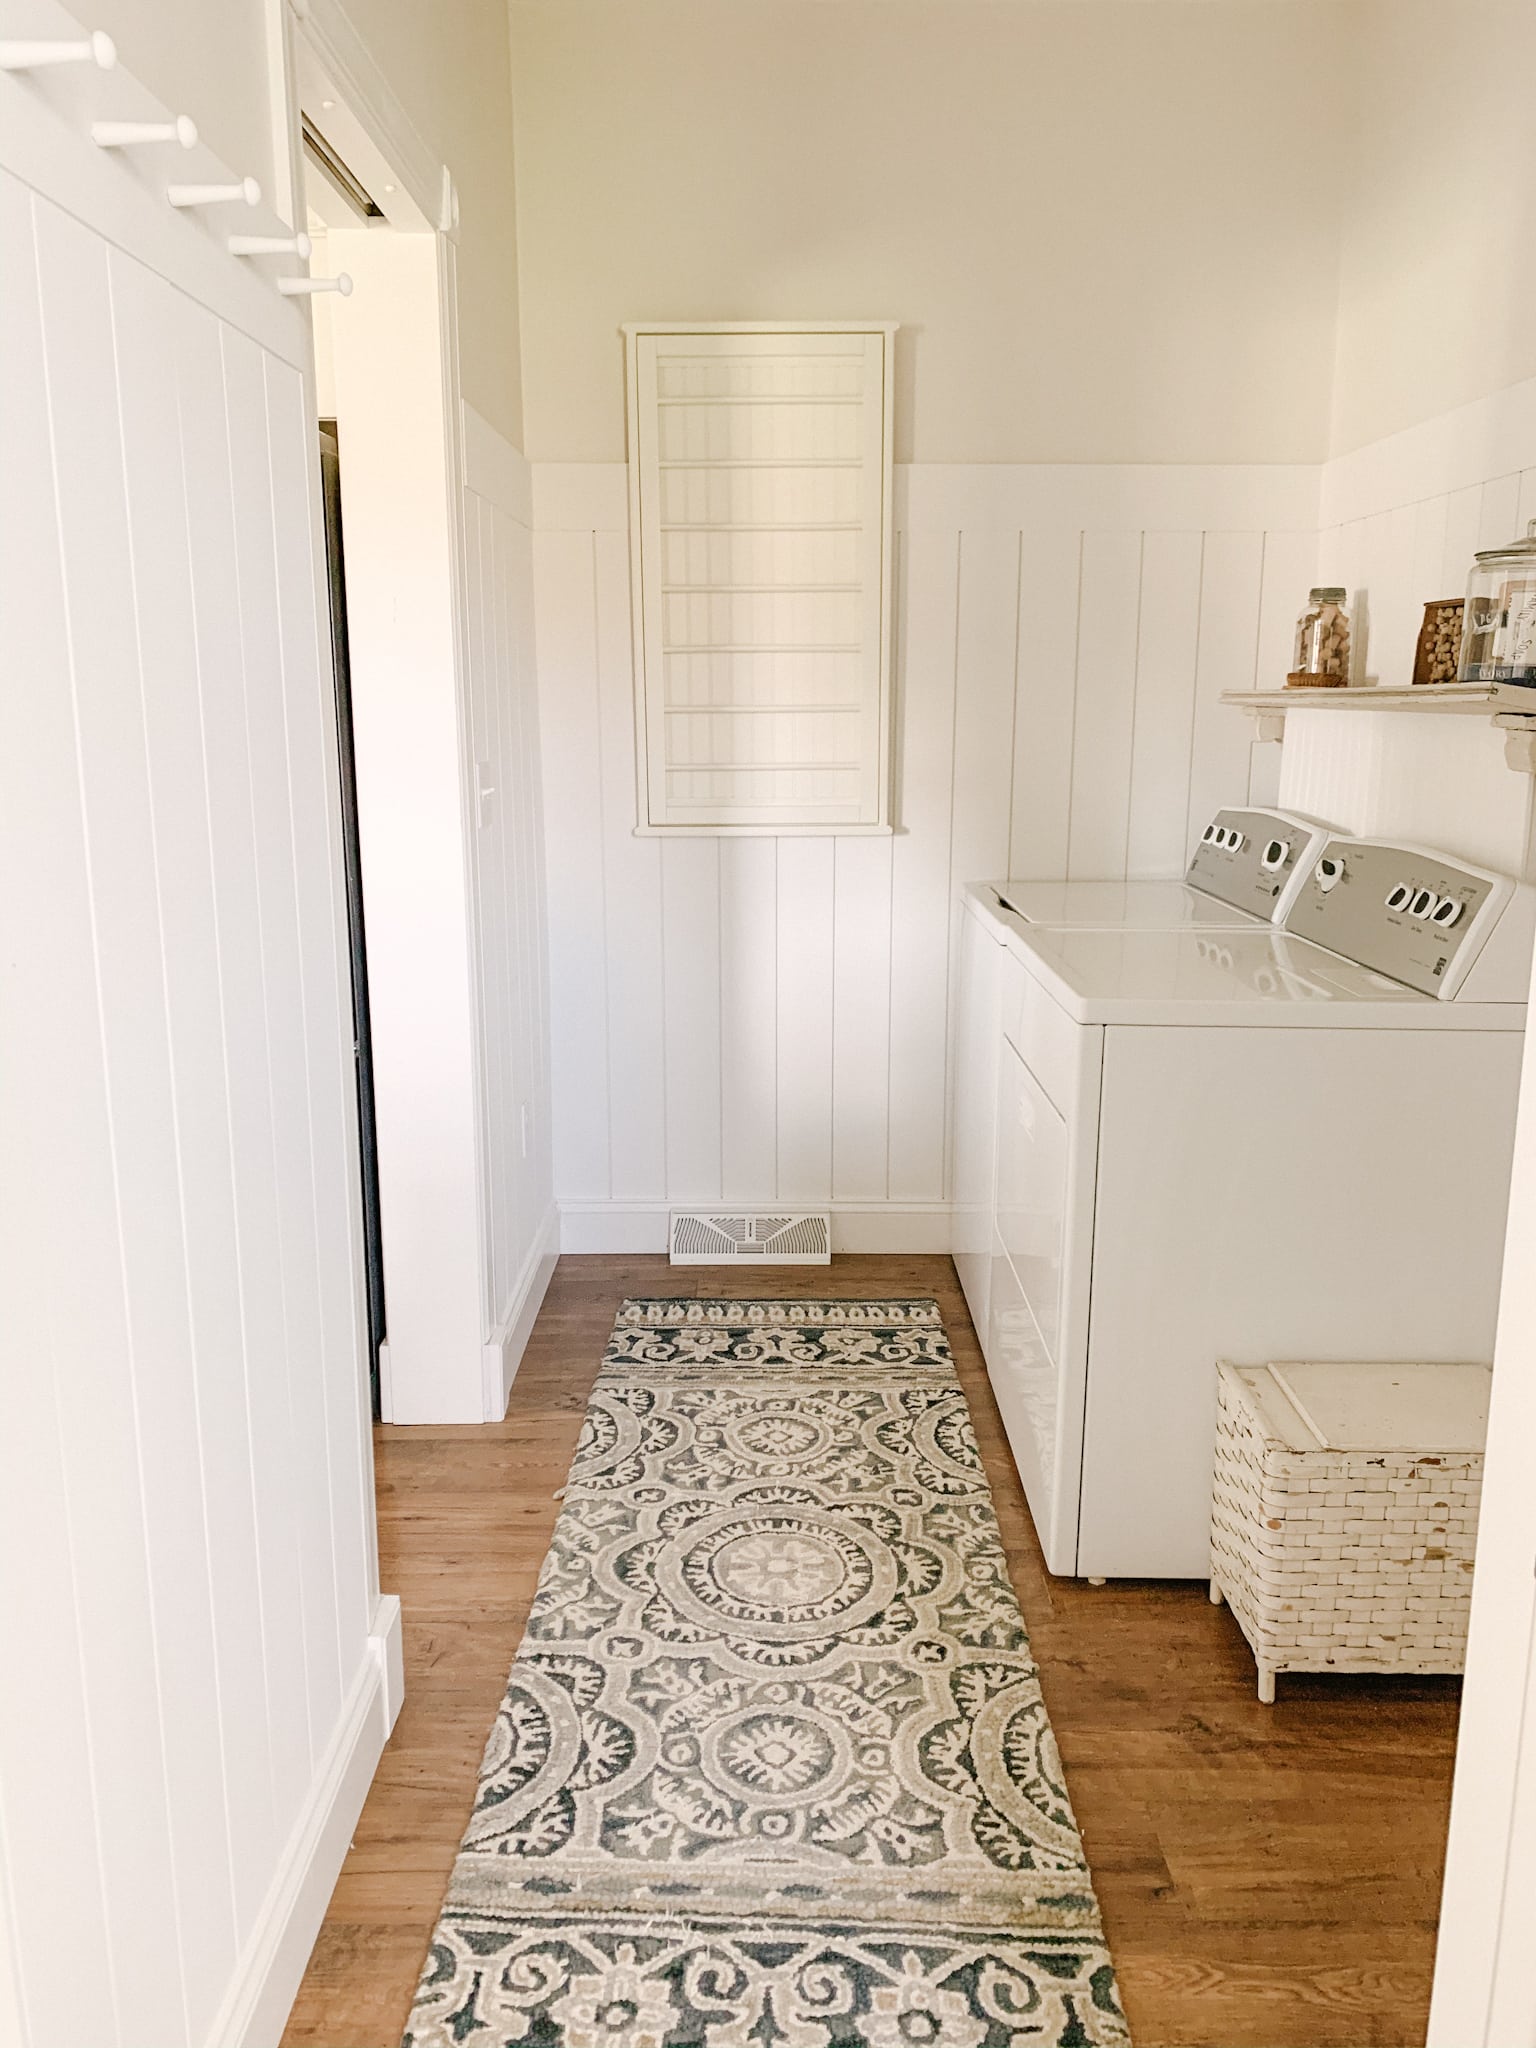 Functional Laundry Room